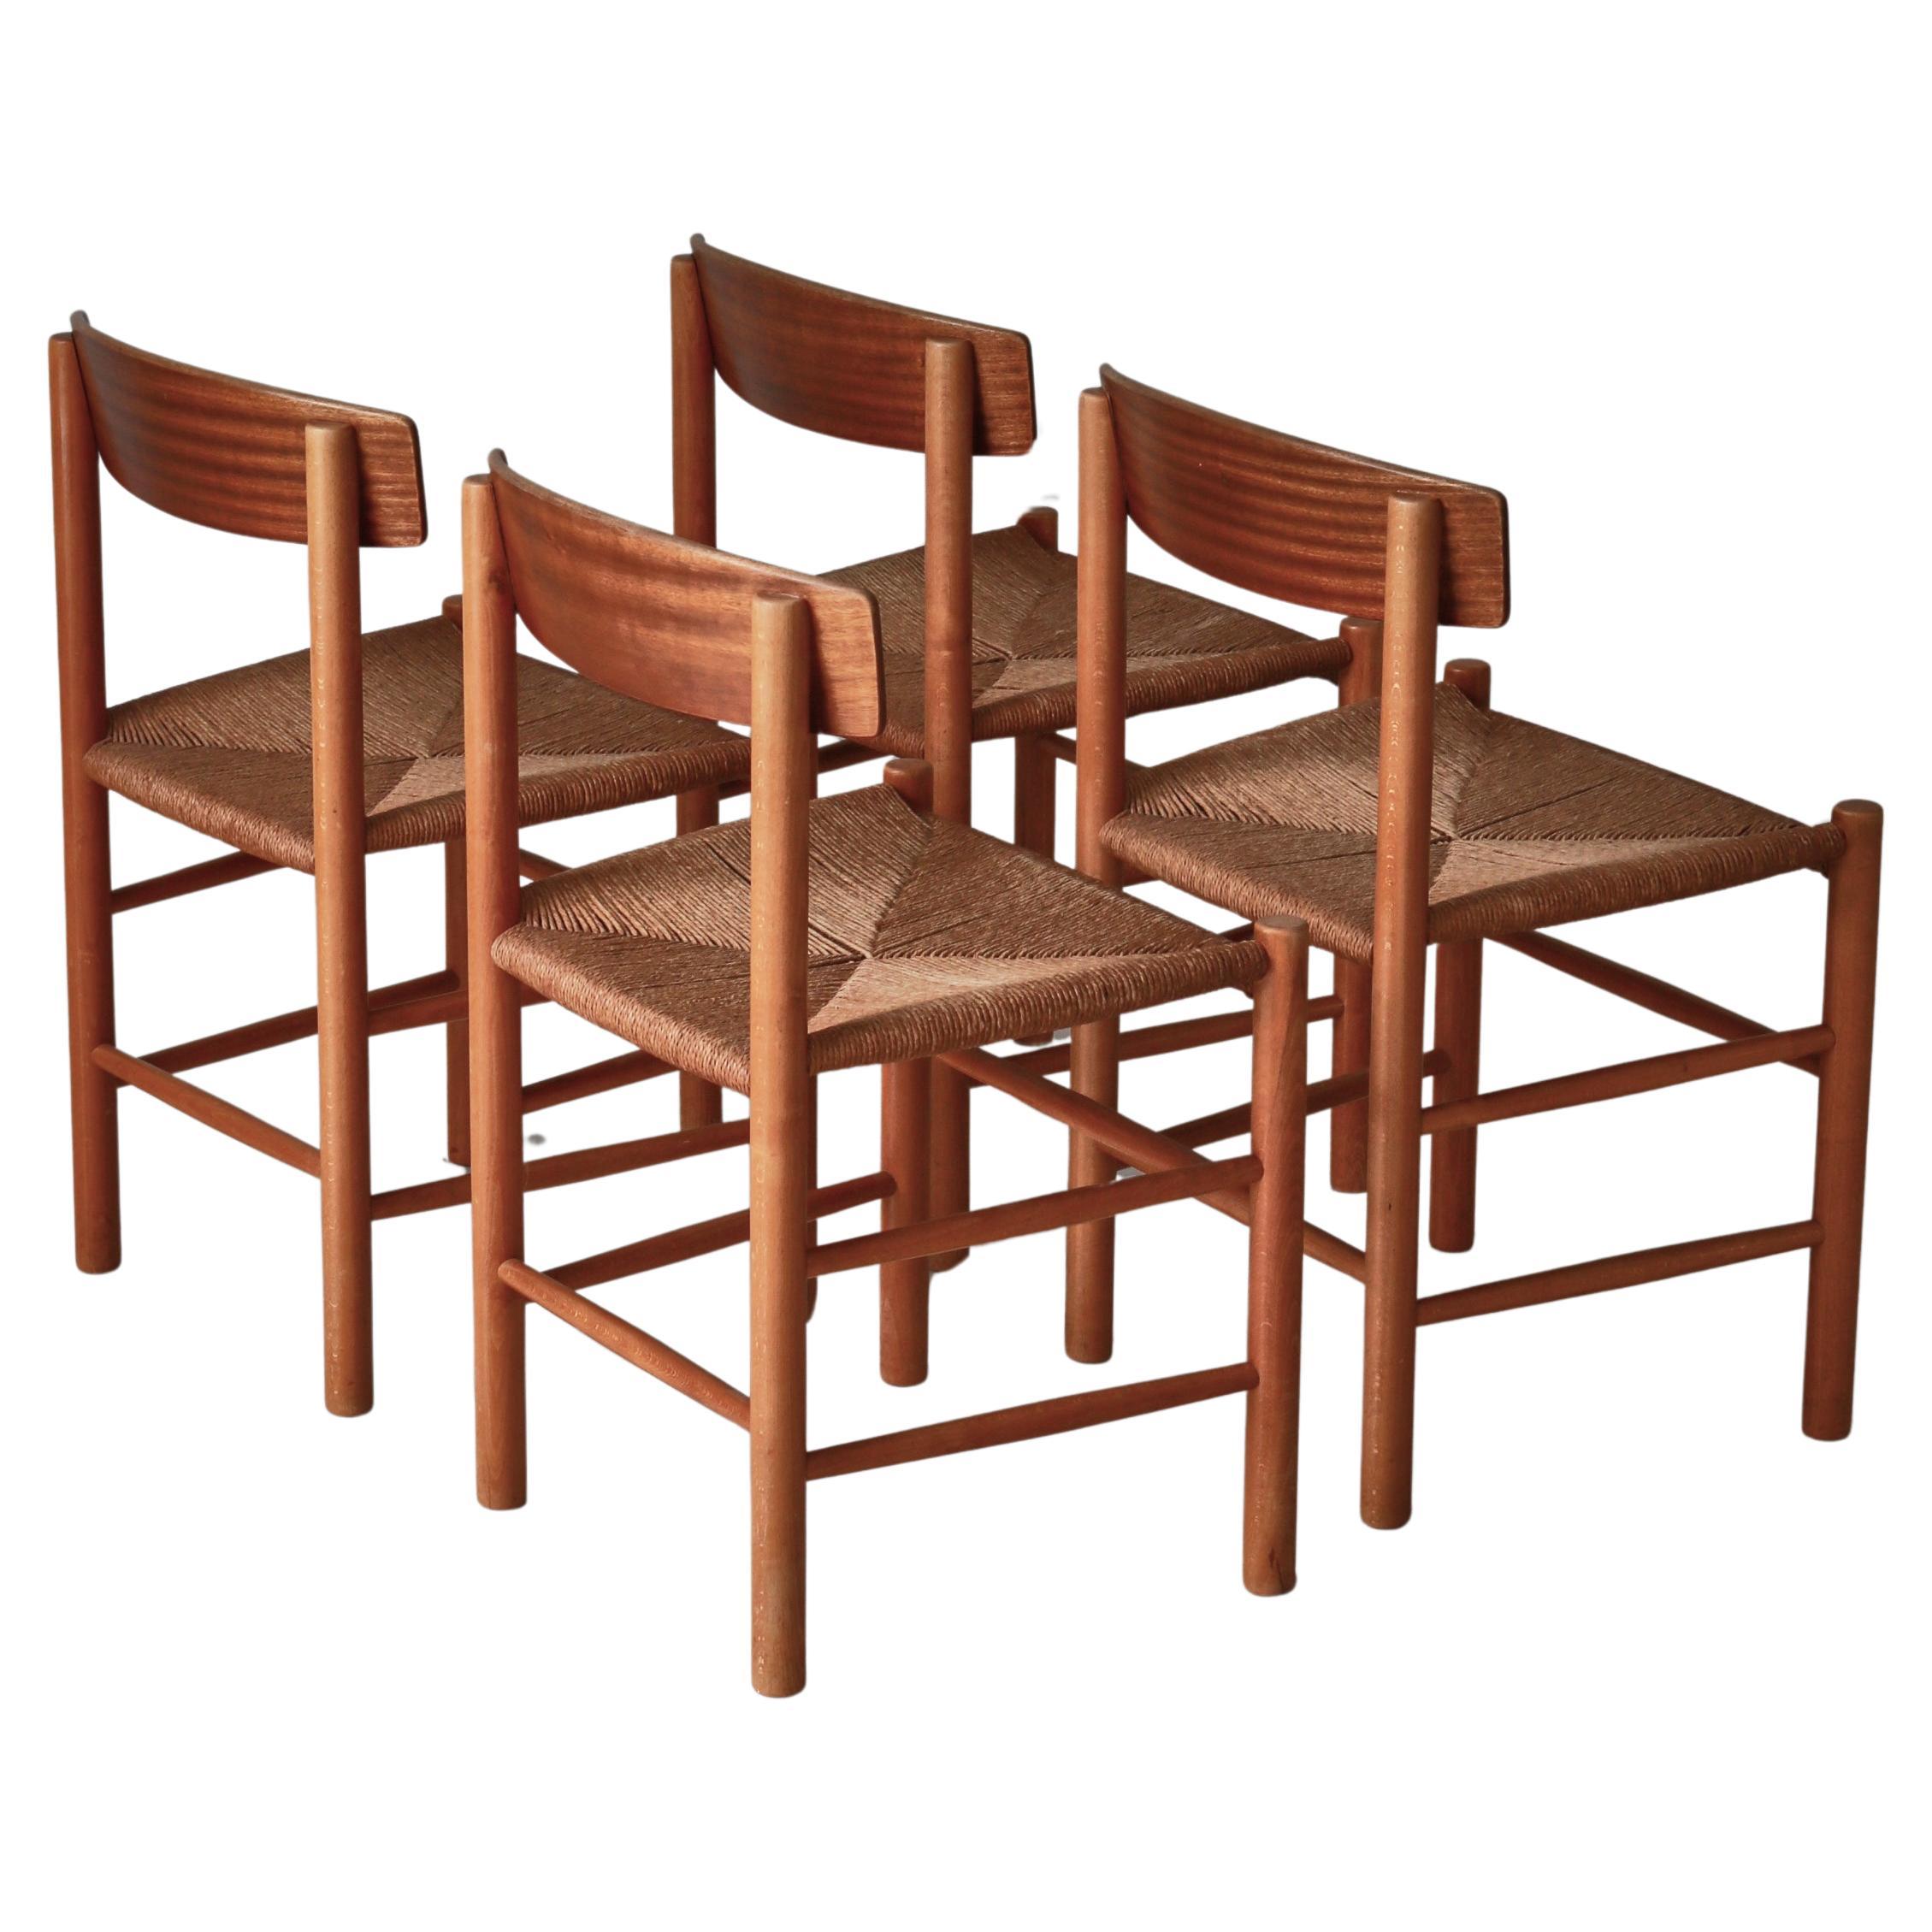 Early set of "People's chairs" by Børge Mogensen, Beech & Mahogany, 1940s